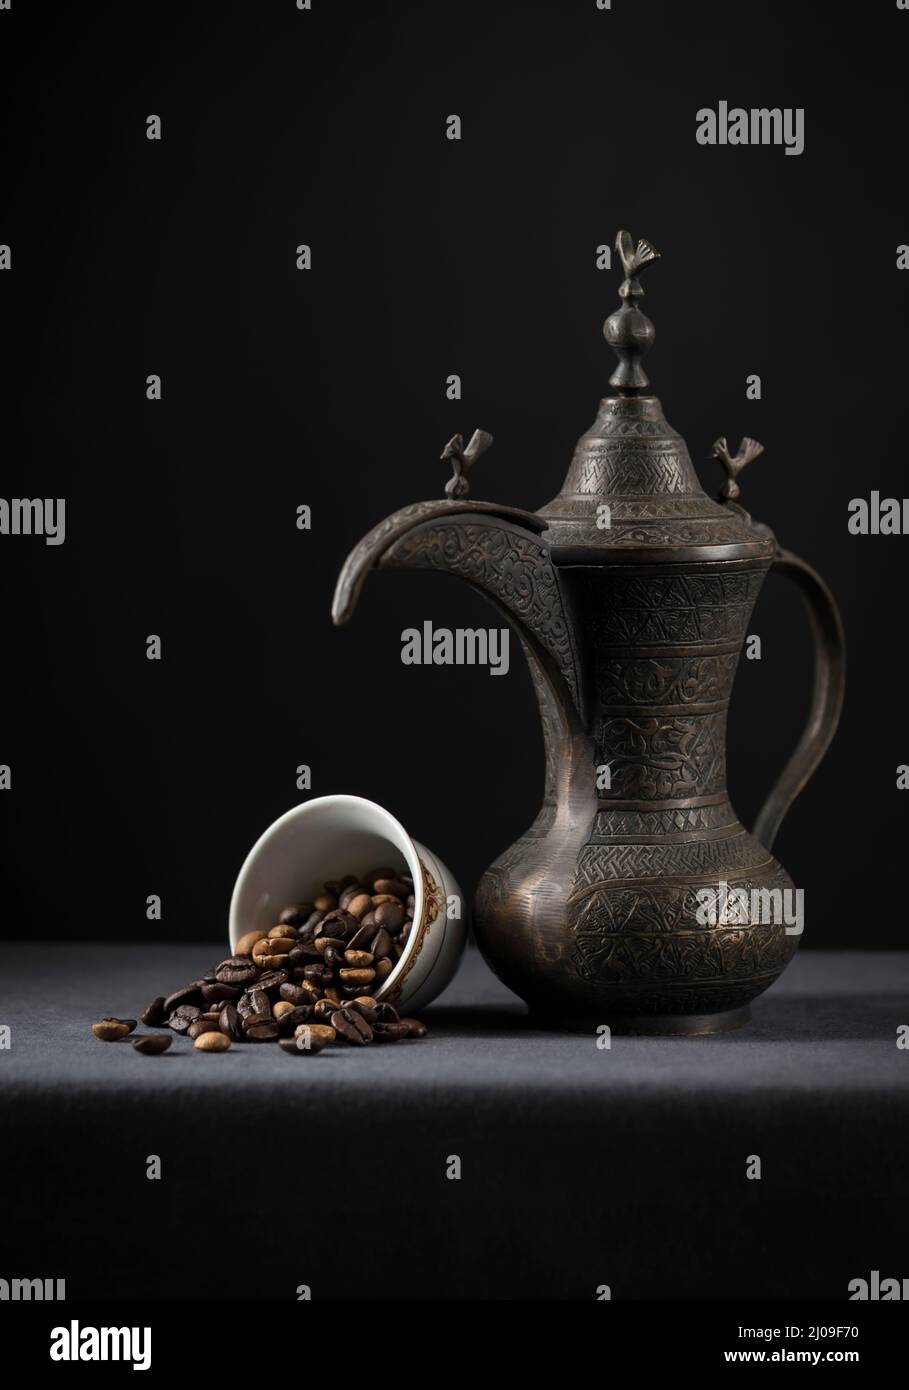 Antique Arabic coffee pot with roasted coffee beans. Coffee beans are spilling out from a cup. Stock photograph. Stock Photo